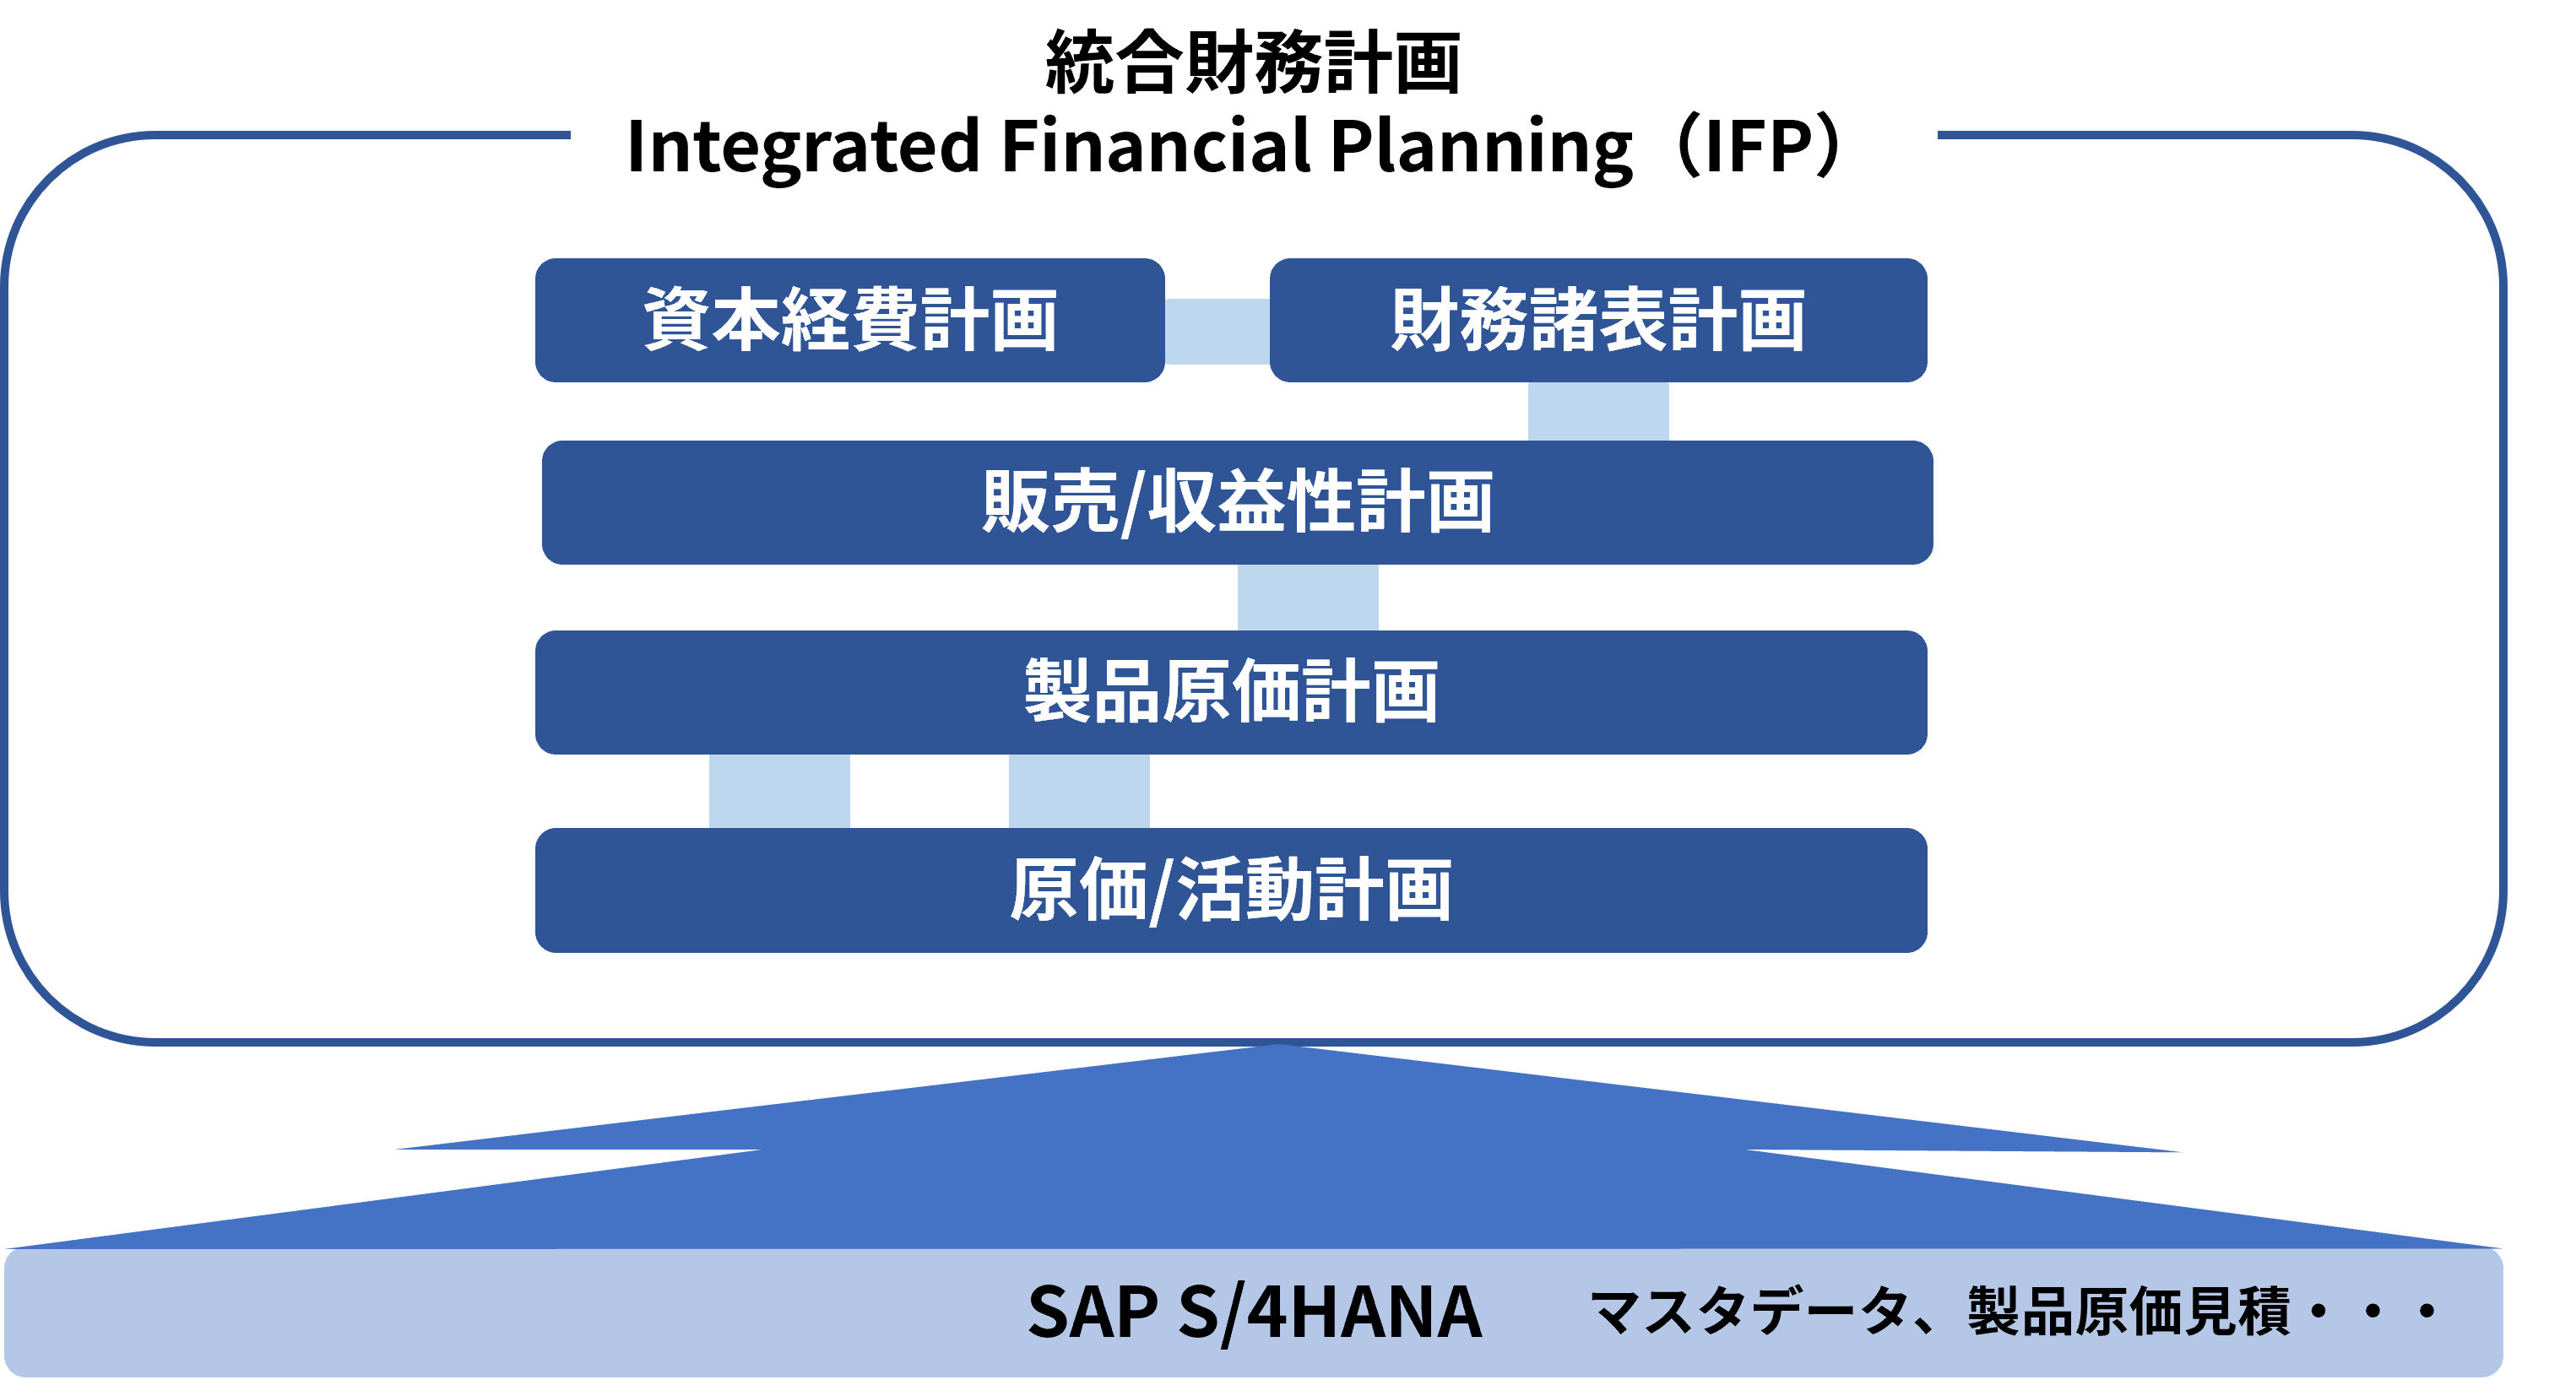 Integrated Financial Planning